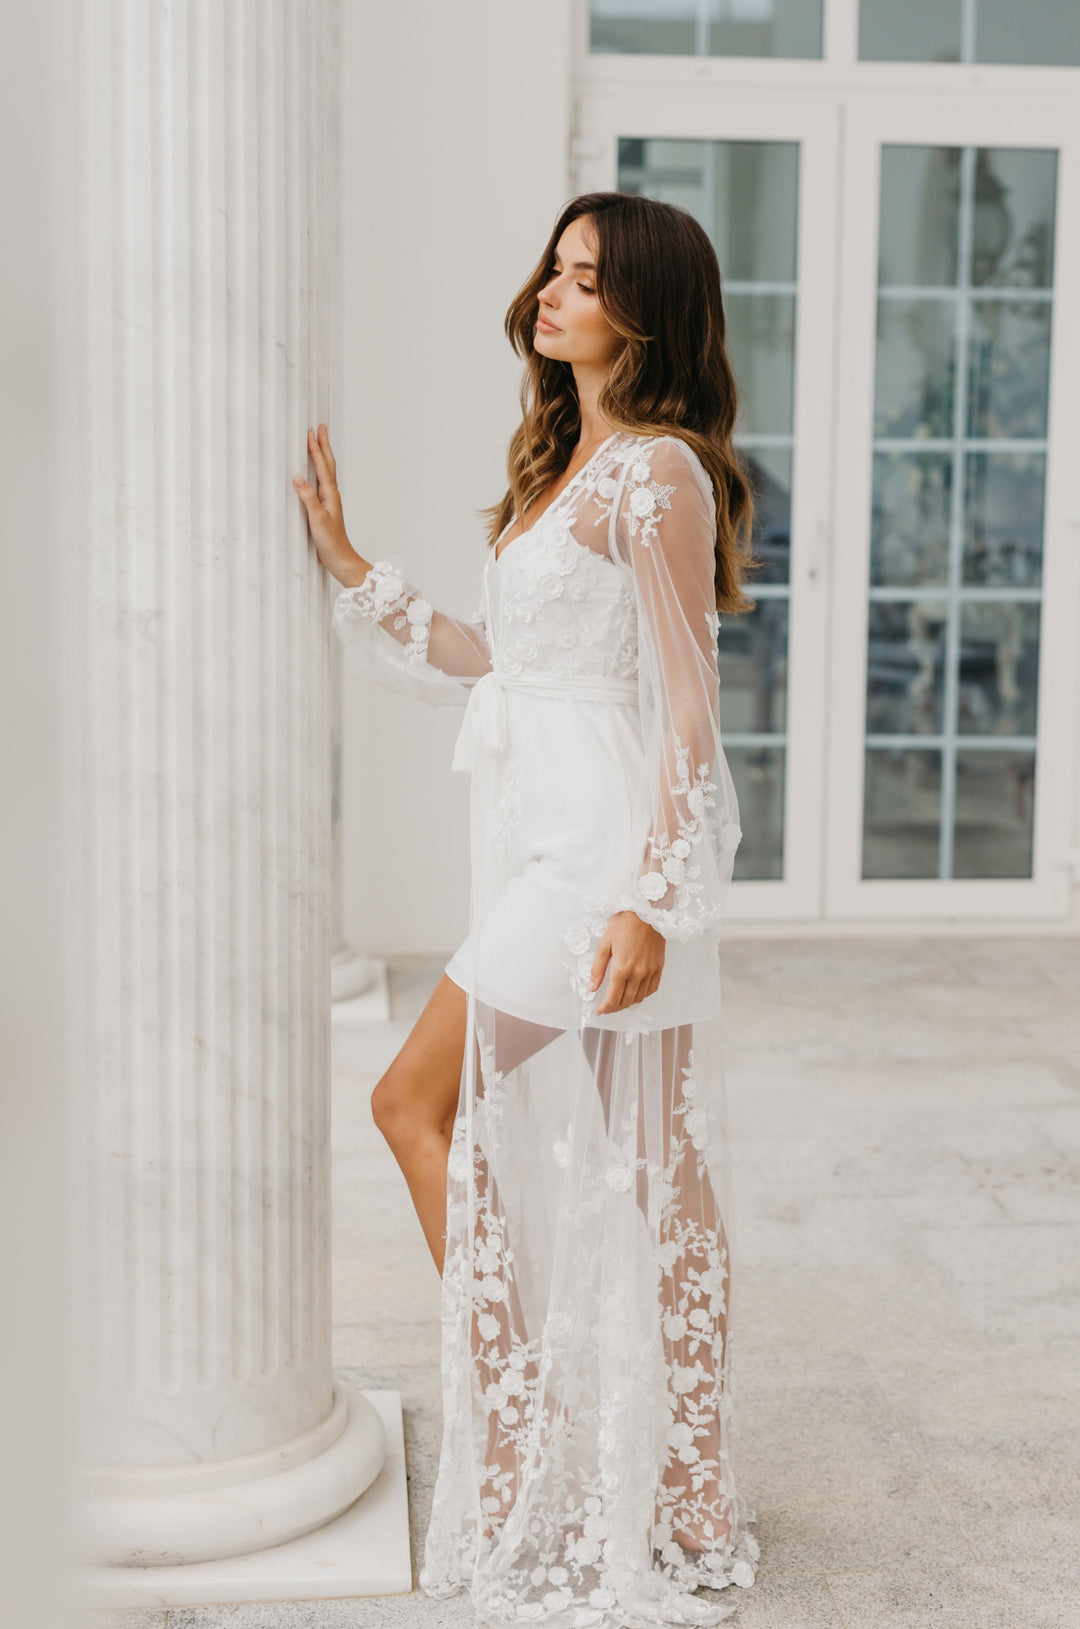 Steffanie Beaded Floral Lace Maxi Bridal Robe - Includes Slip